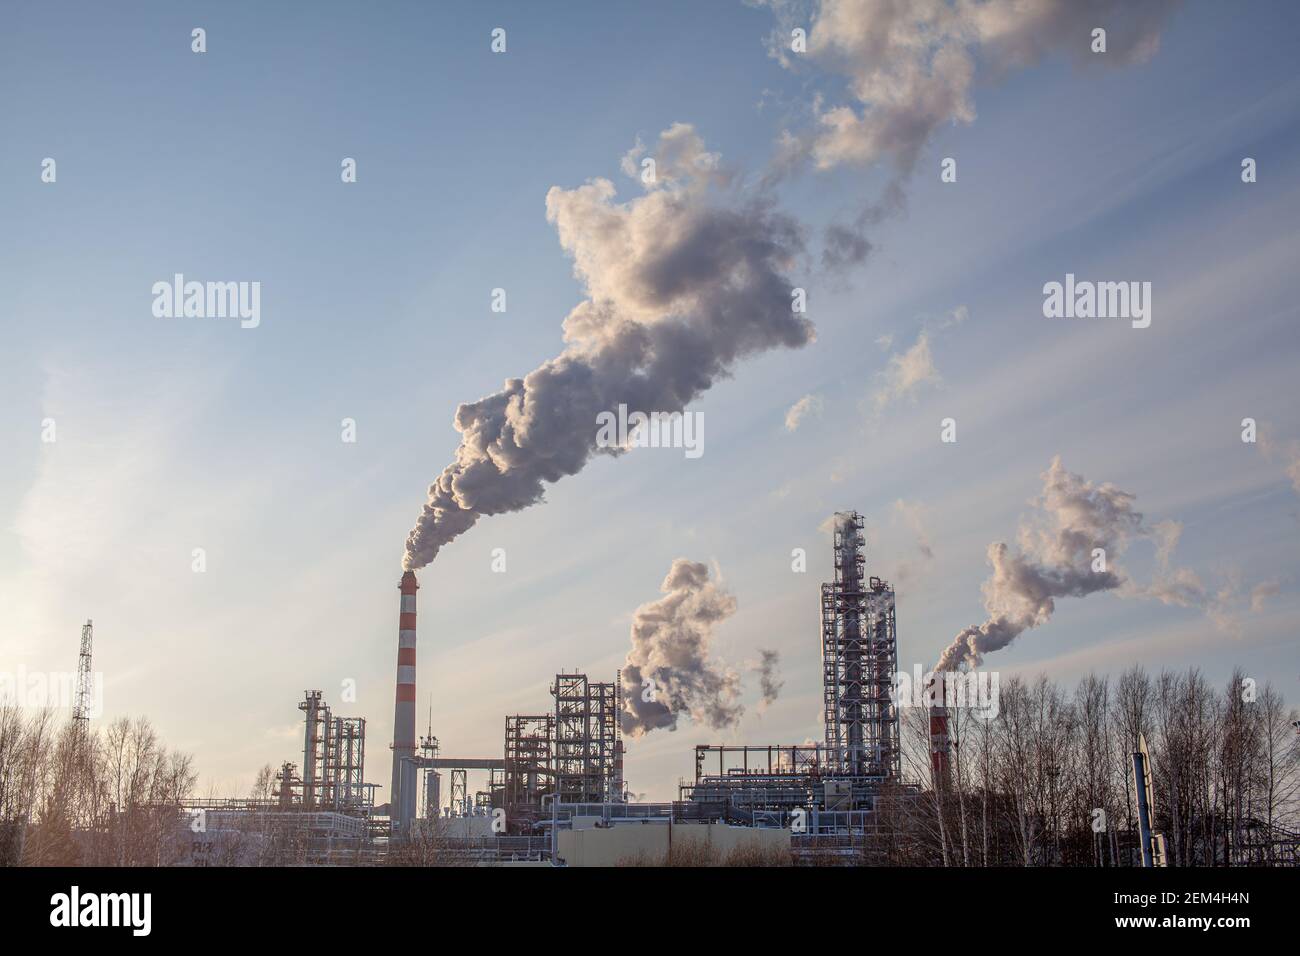 Petrochemical industrial factory of heavy industry, power refinery production with smoke pollution. Thick smoke is coming from the factory's chimney Stock Photo